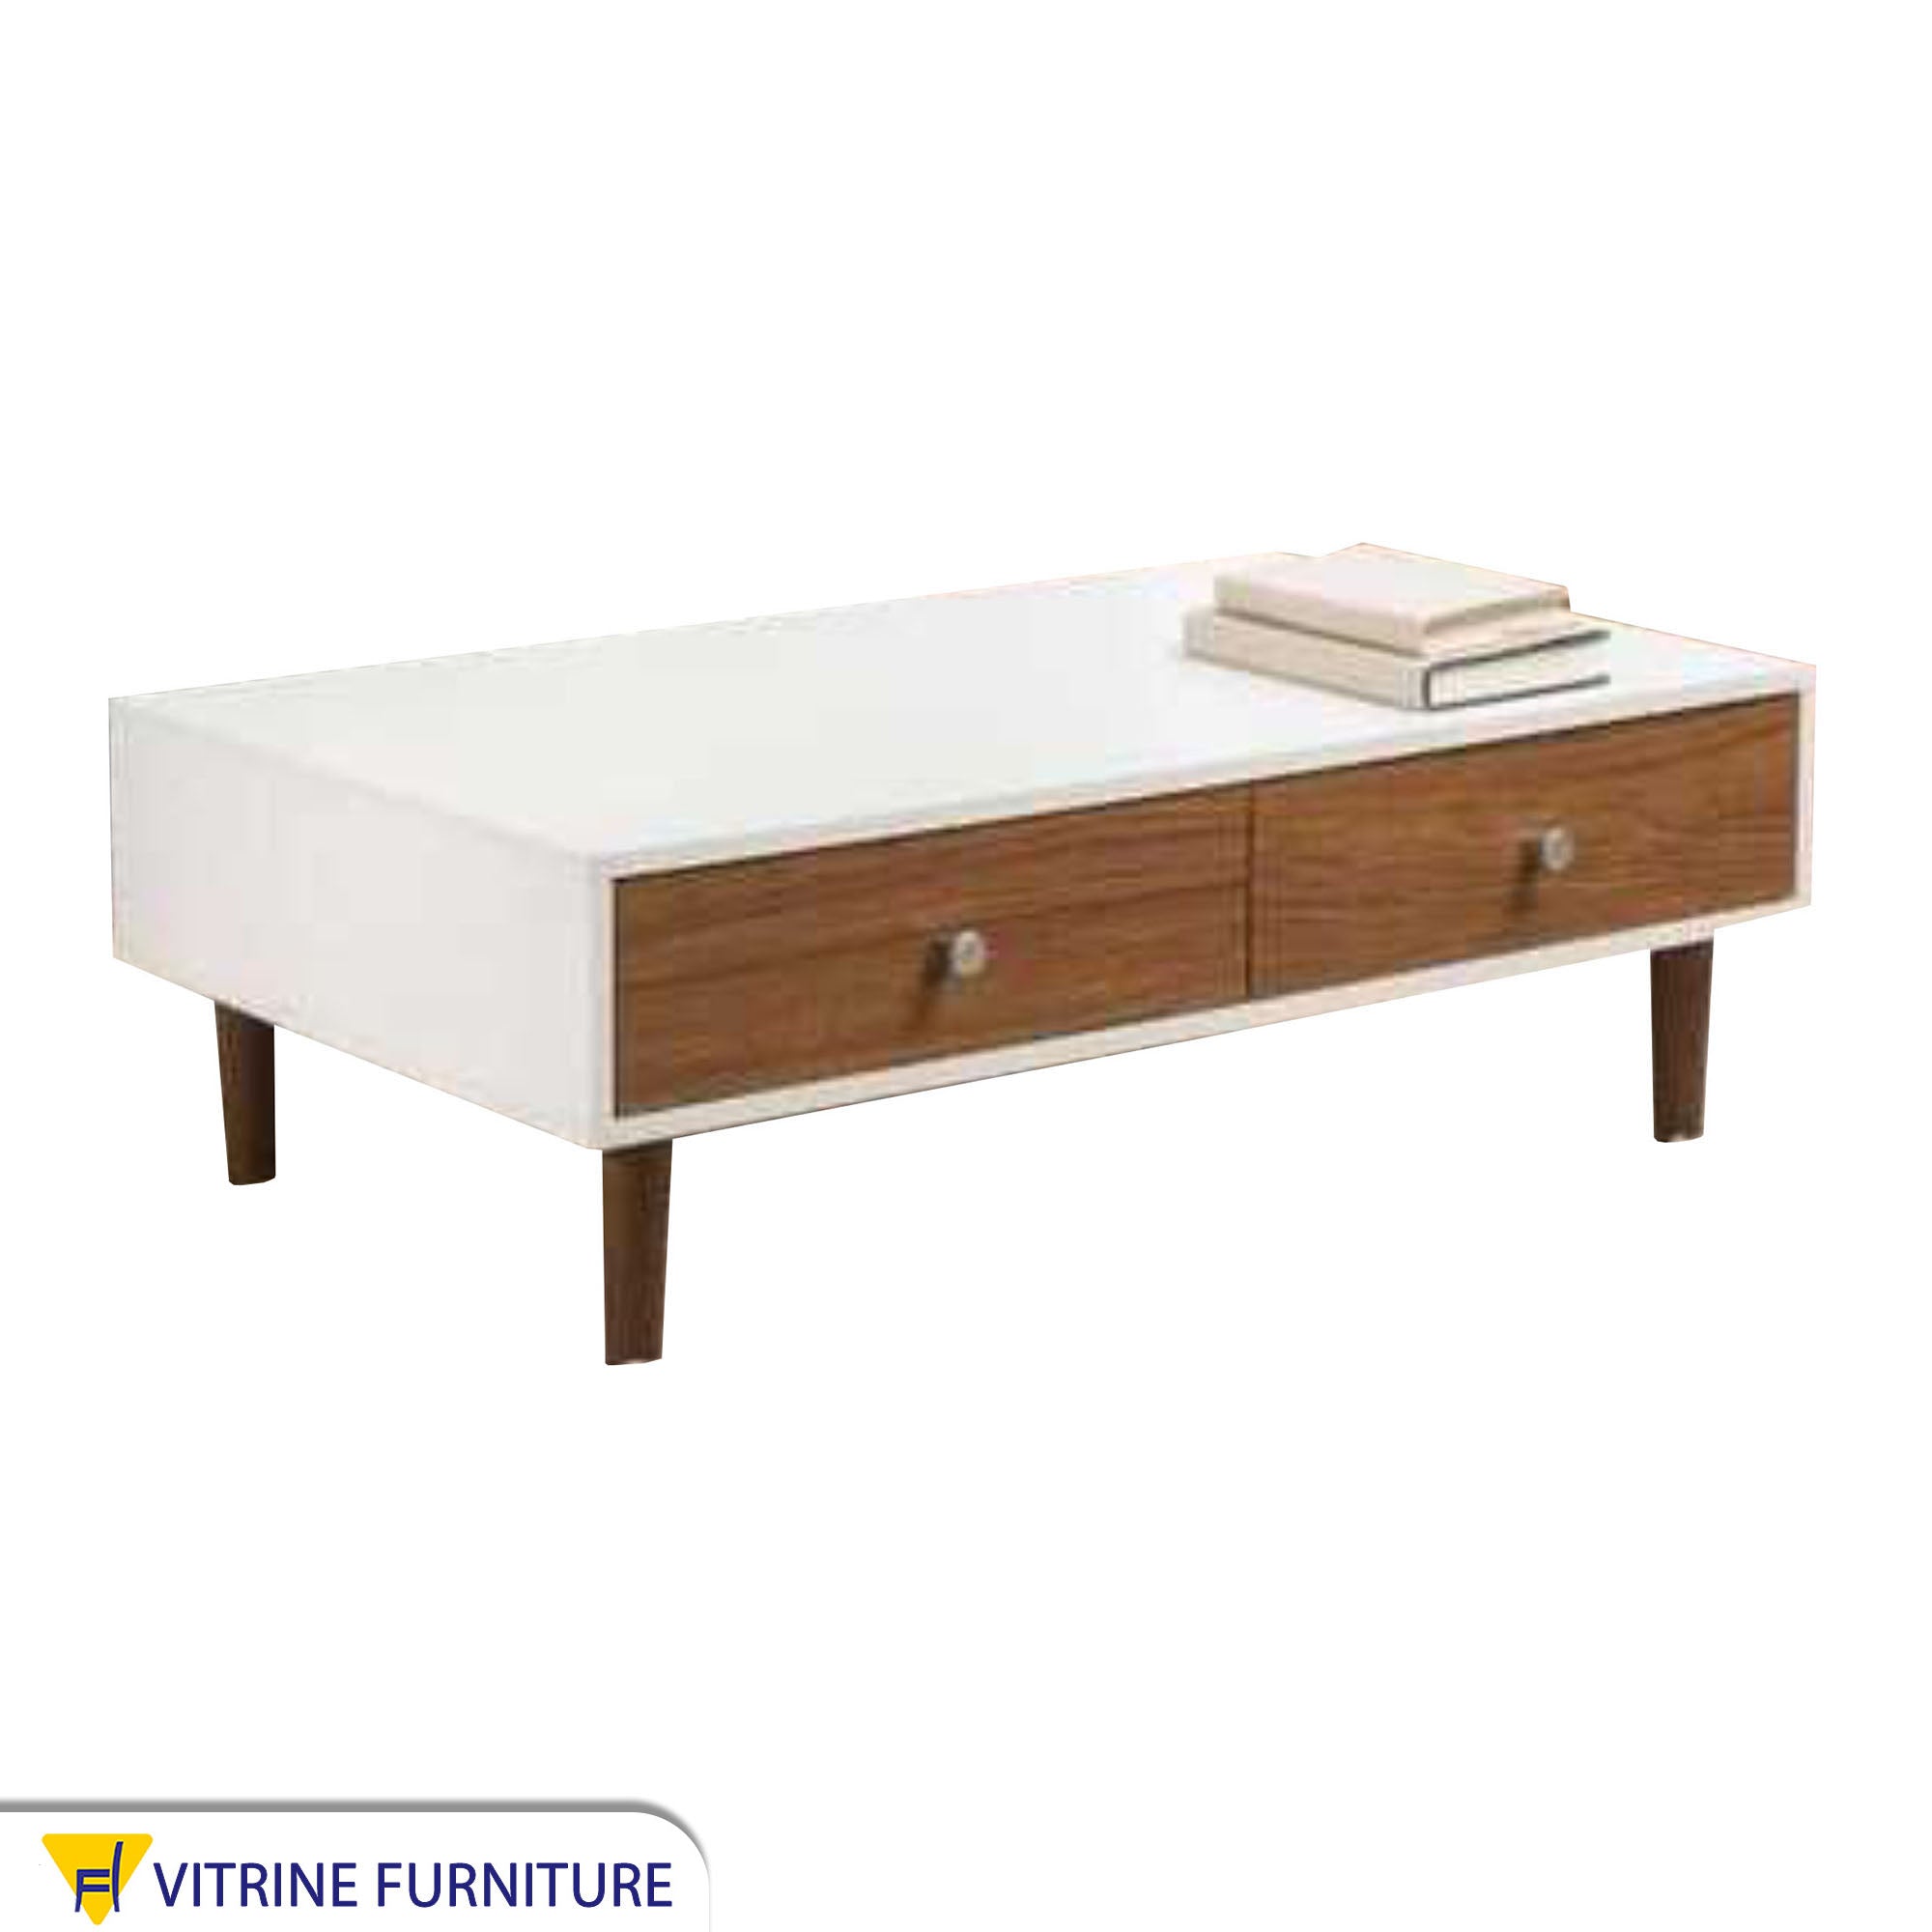 White center table with 2 drawers